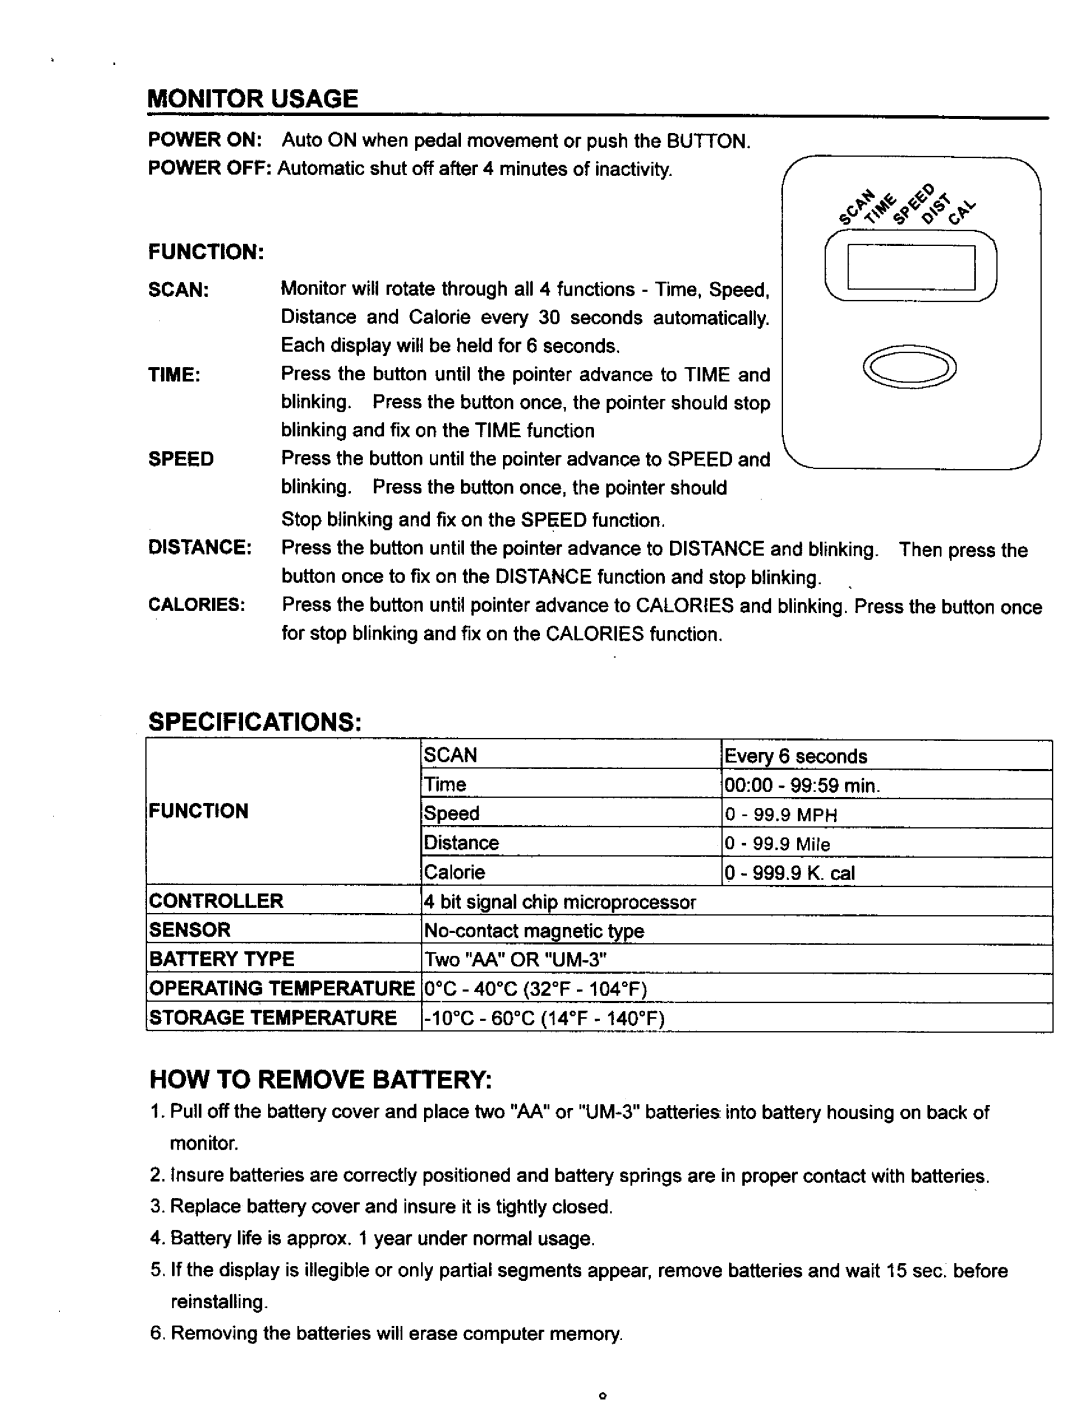 Sears JH4000, 142.288040 operating instructions Monitor Usage, Specifications, How To Remove Battery 